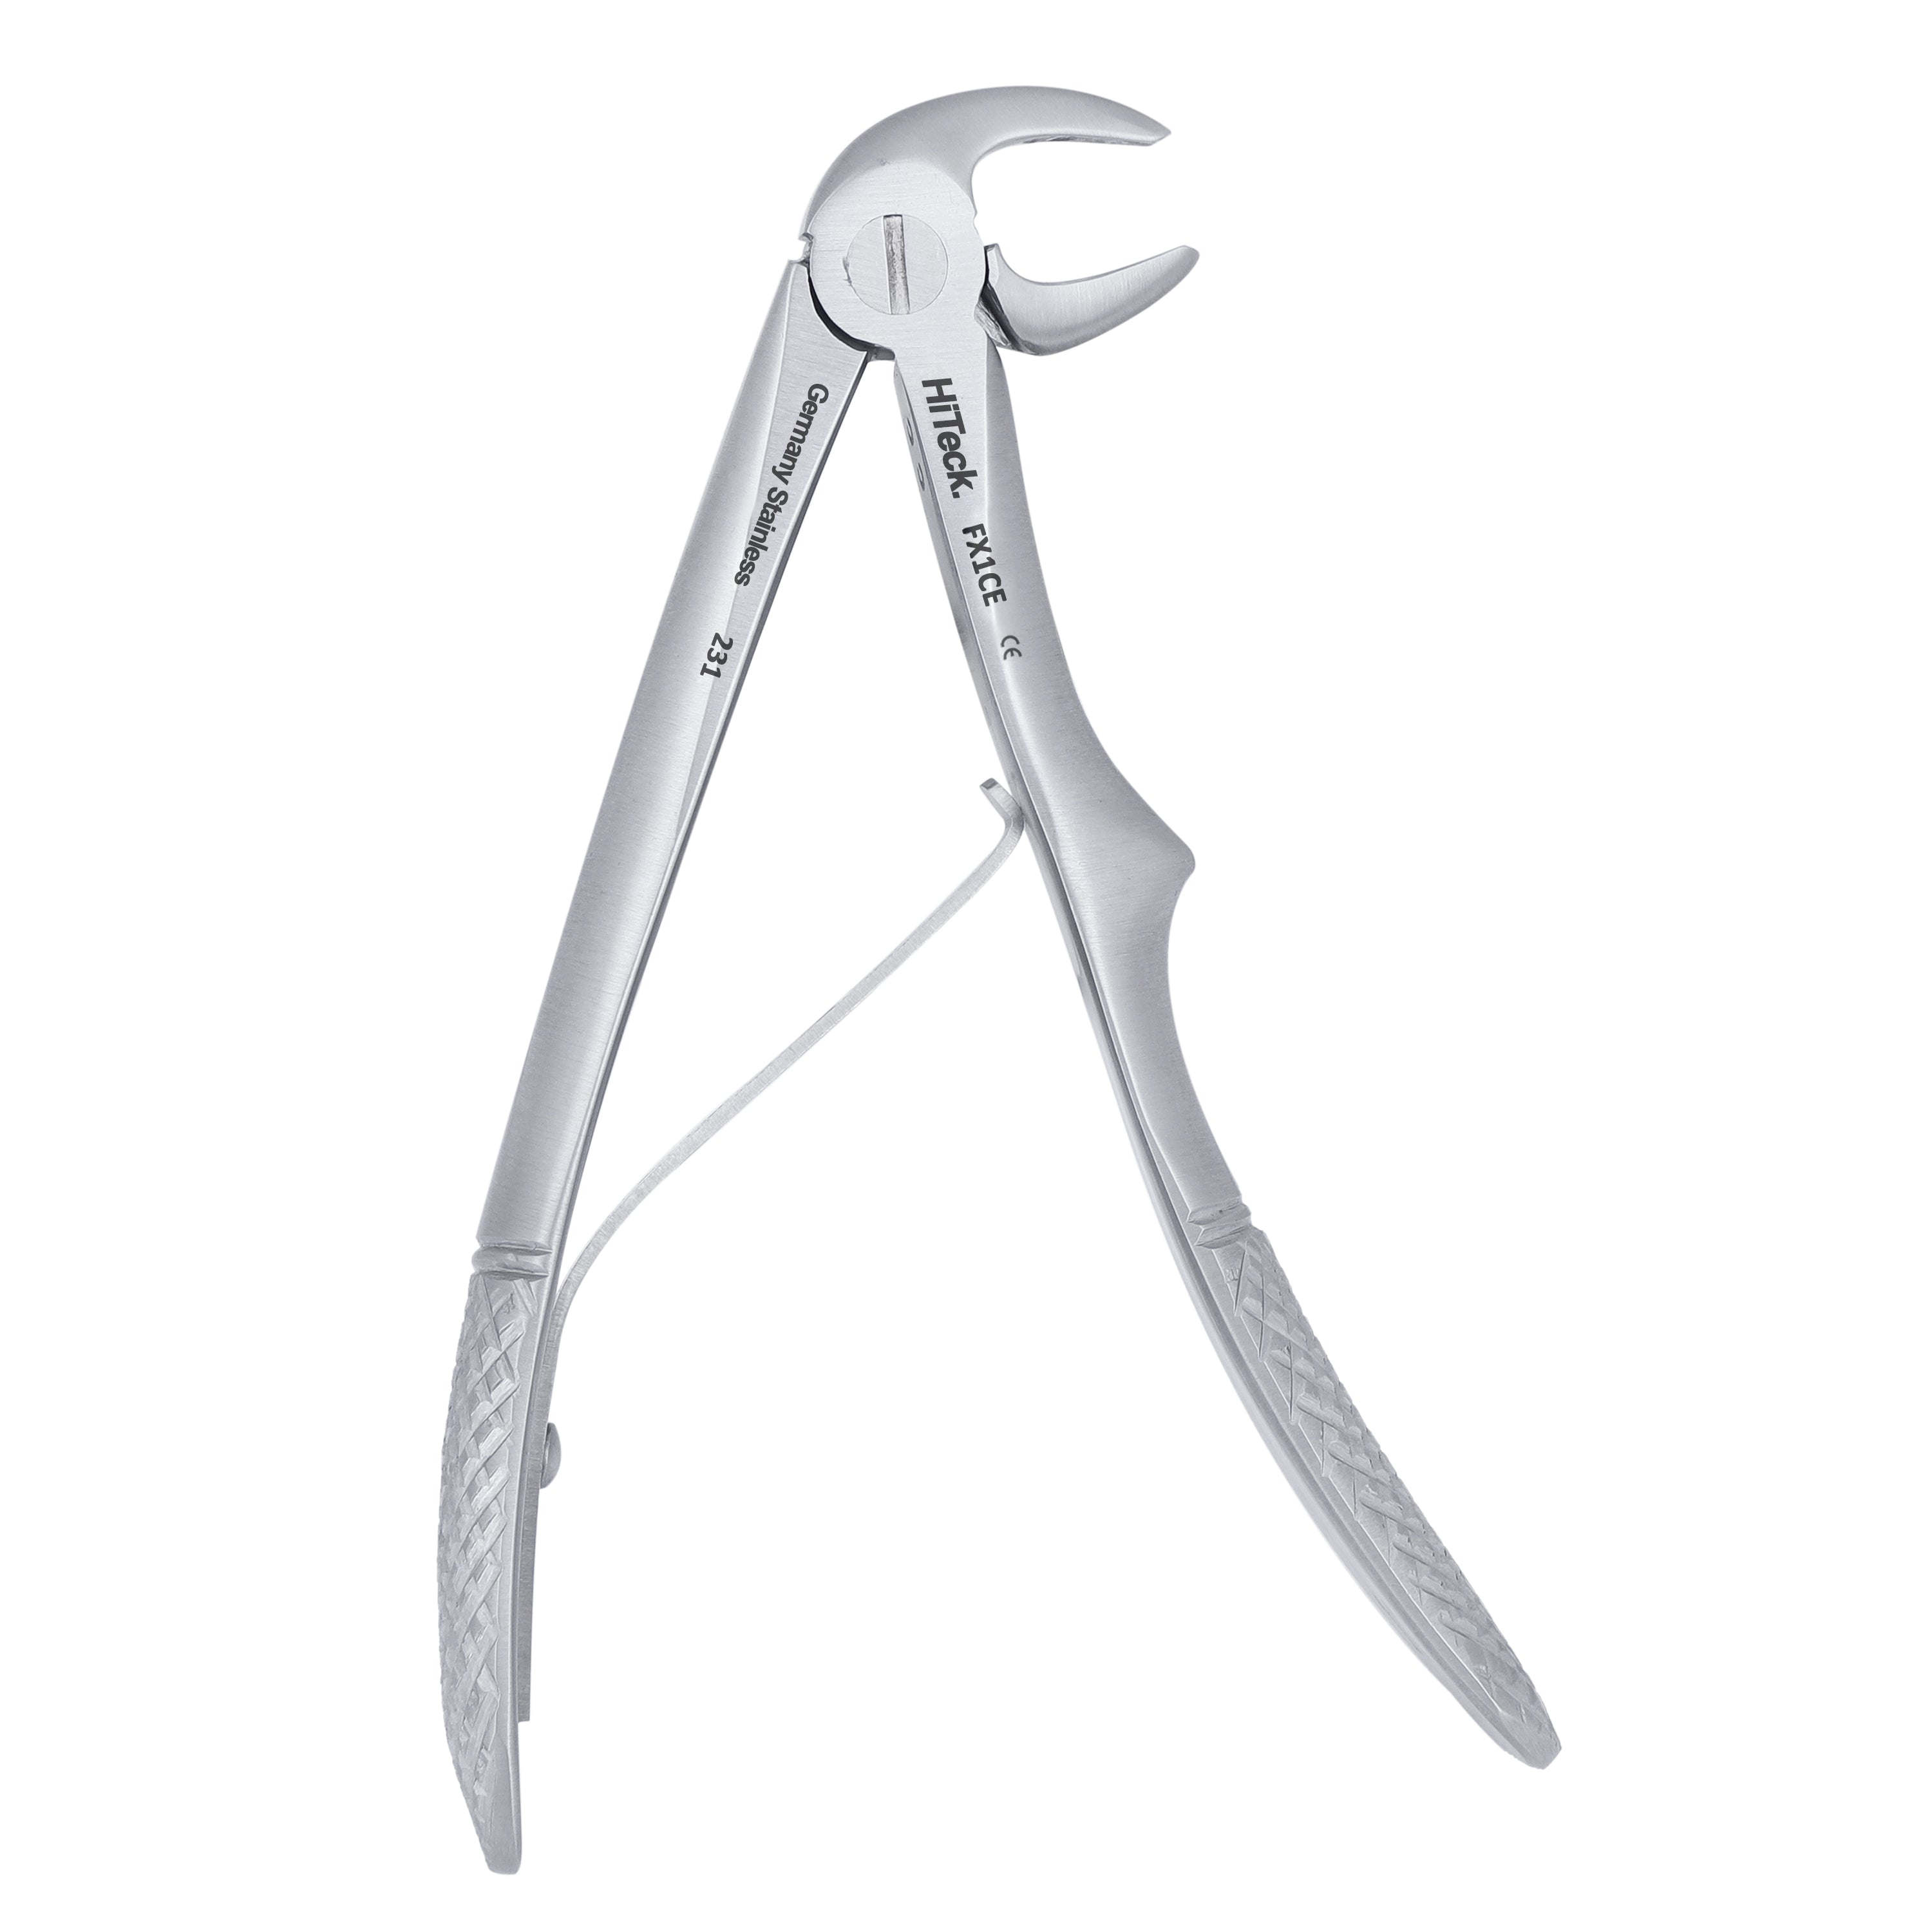 1C Pedo Lower Incisors English Extraction Forcep - HiTeck Medical Instruments